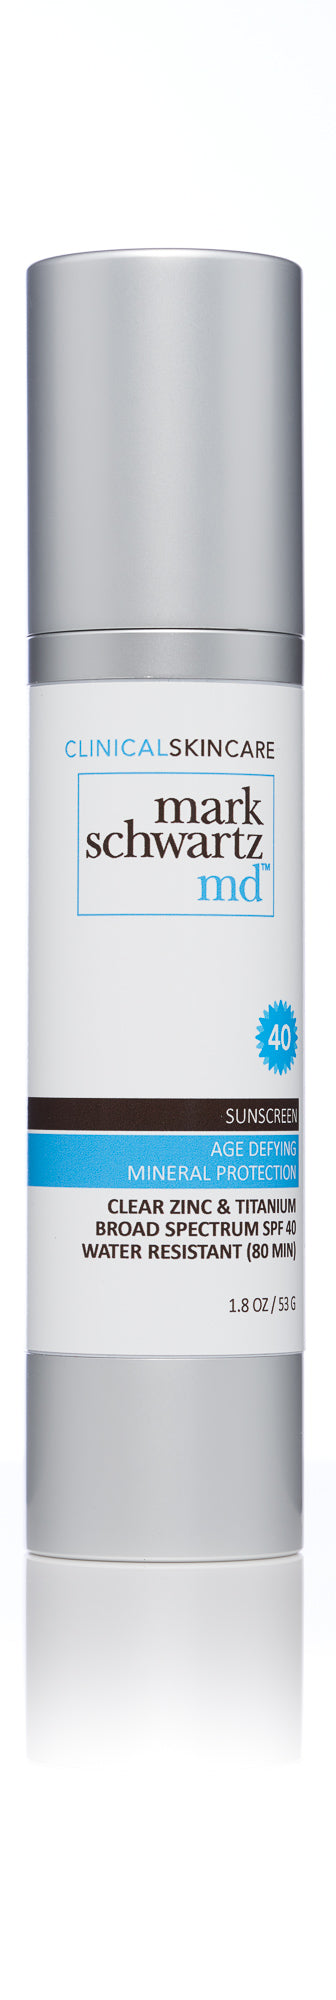 Age Defying Mineral Protection SPF 40 Facial Sunscreen